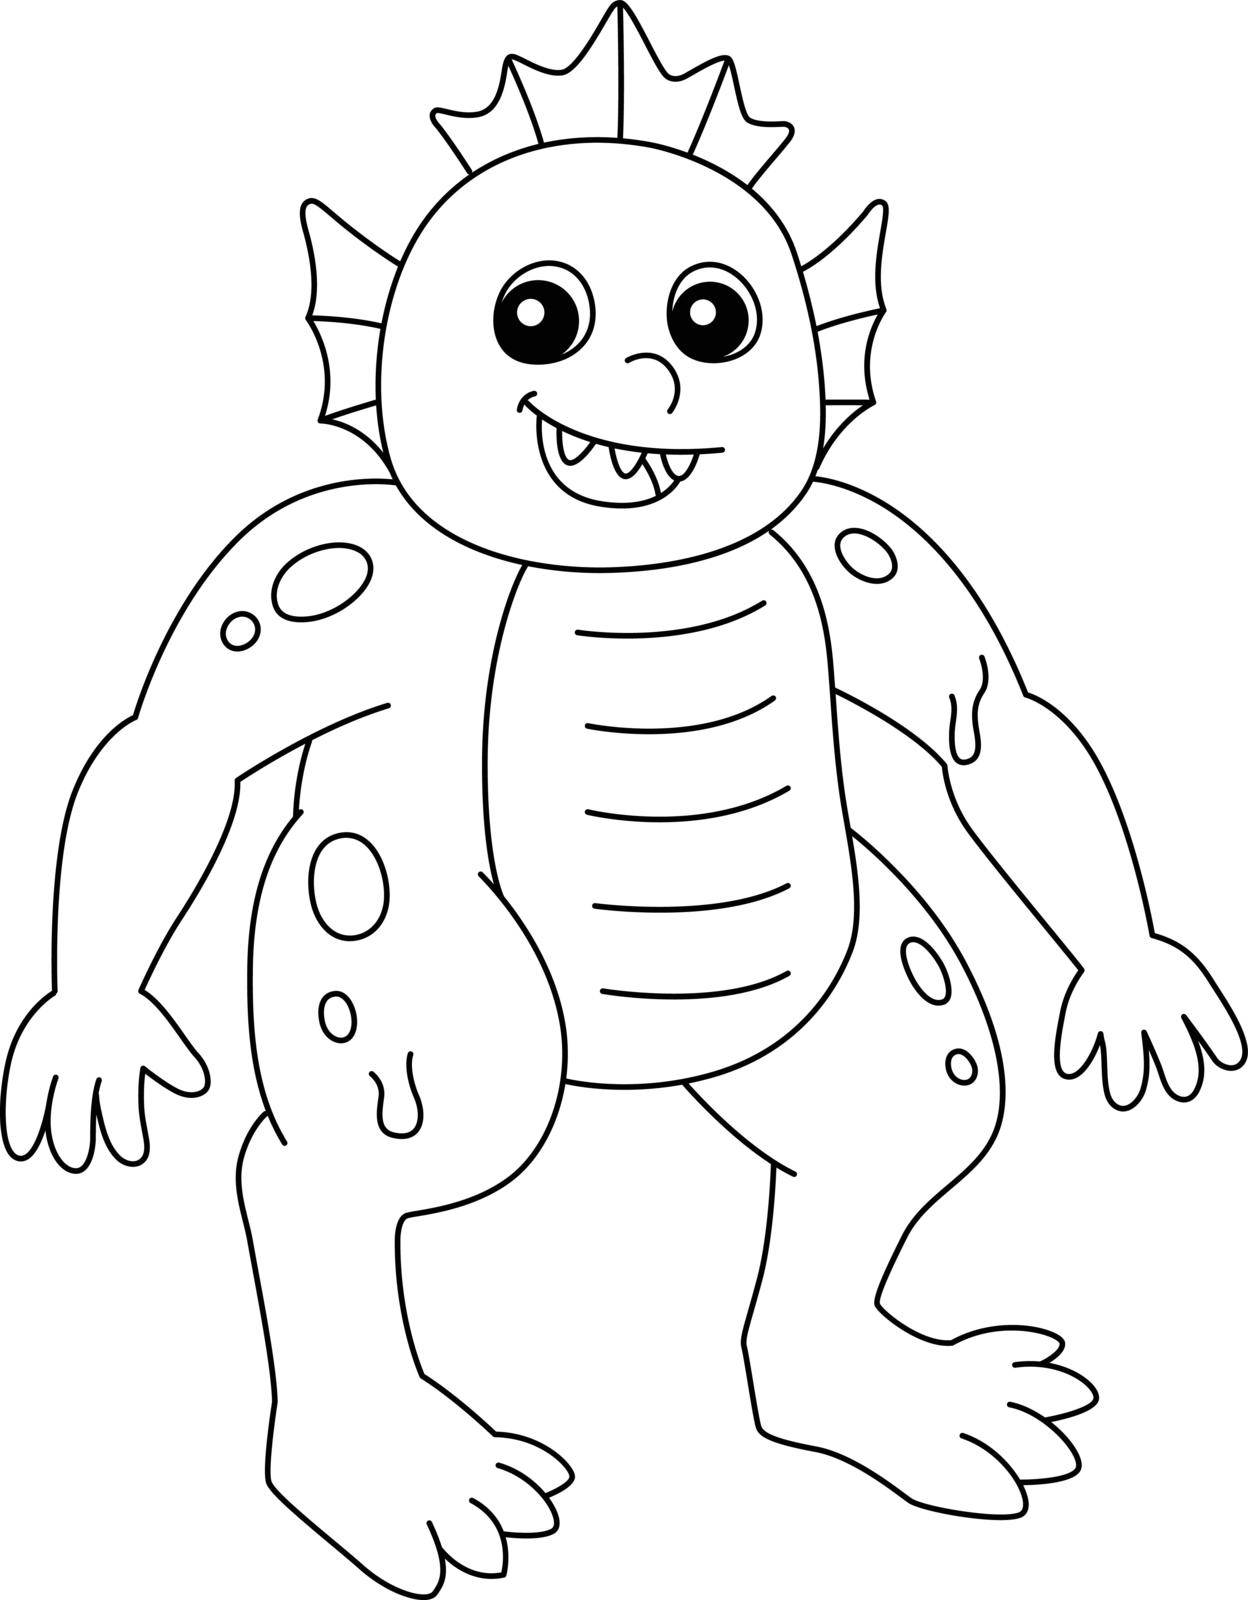 A cute and funny coloring page of a swamp monster Halloween. Provides hours of coloring fun for children. To color, this page is very easy. Suitable for little kids and toddlers.